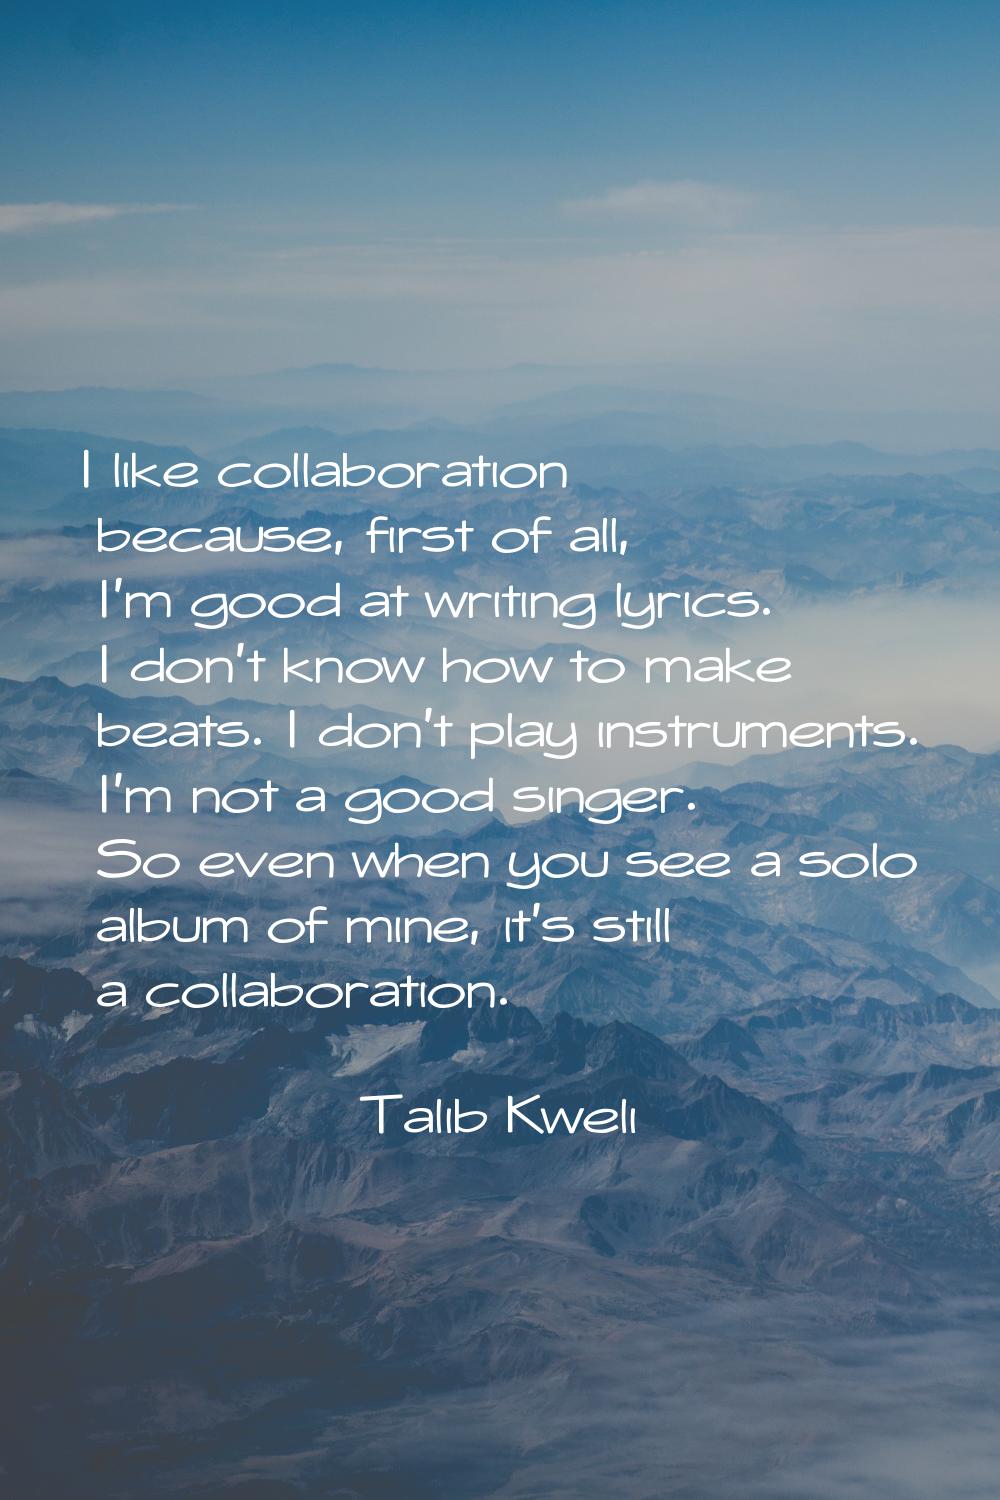 I like collaboration because, first of all, I'm good at writing lyrics. I don't know how to make be